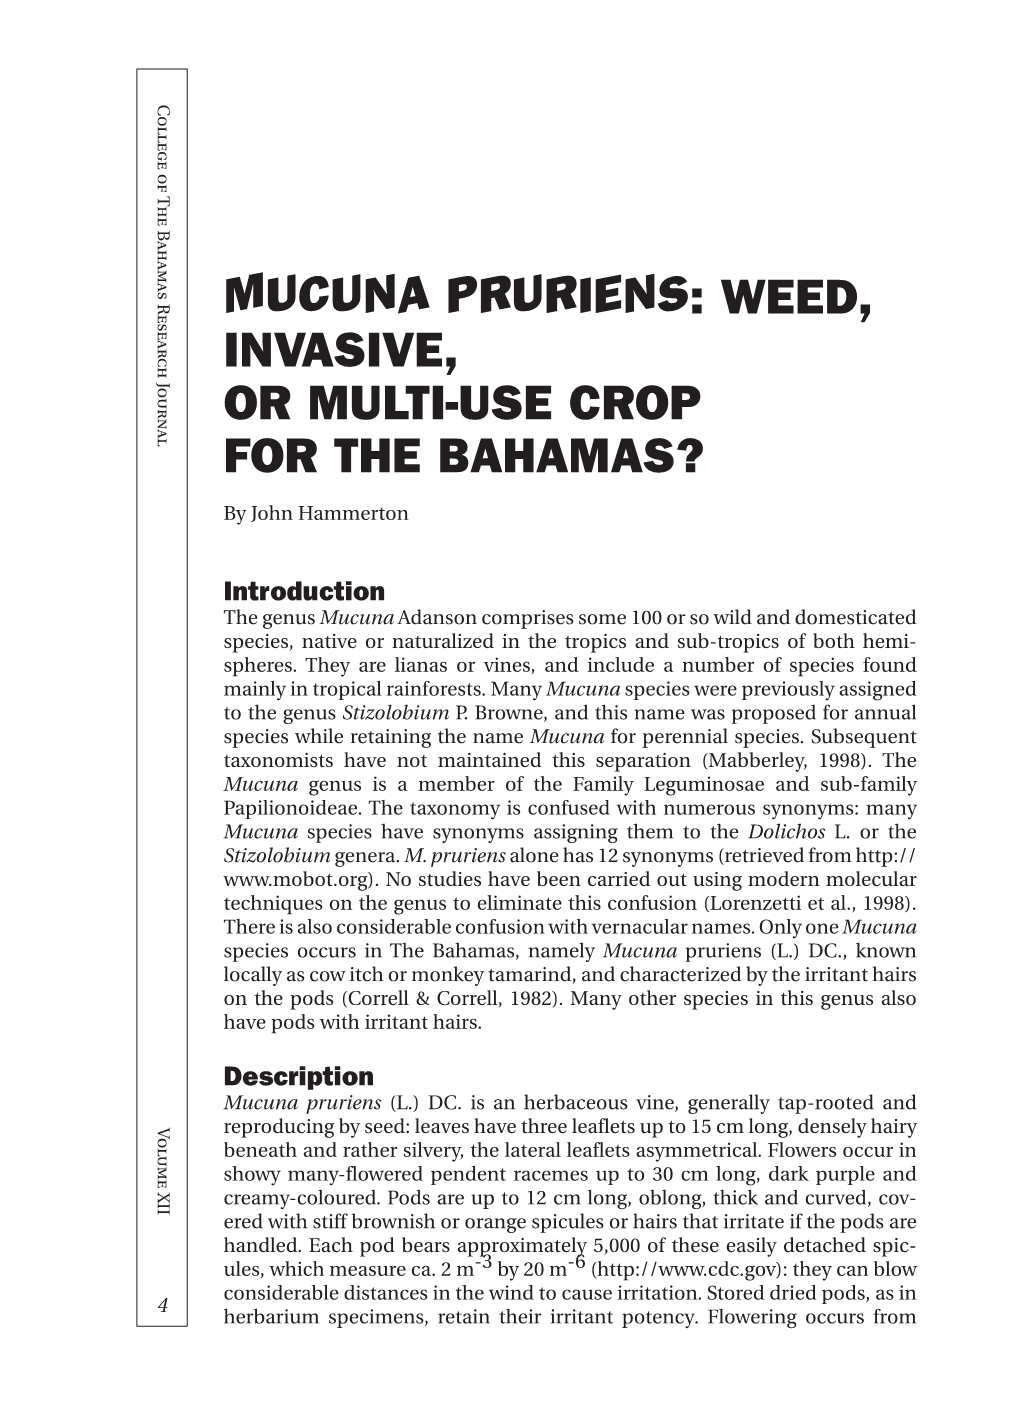 Mucuna Pruriens: Weed, Invasive, Or Multi-Use Crop for the Bahamas?